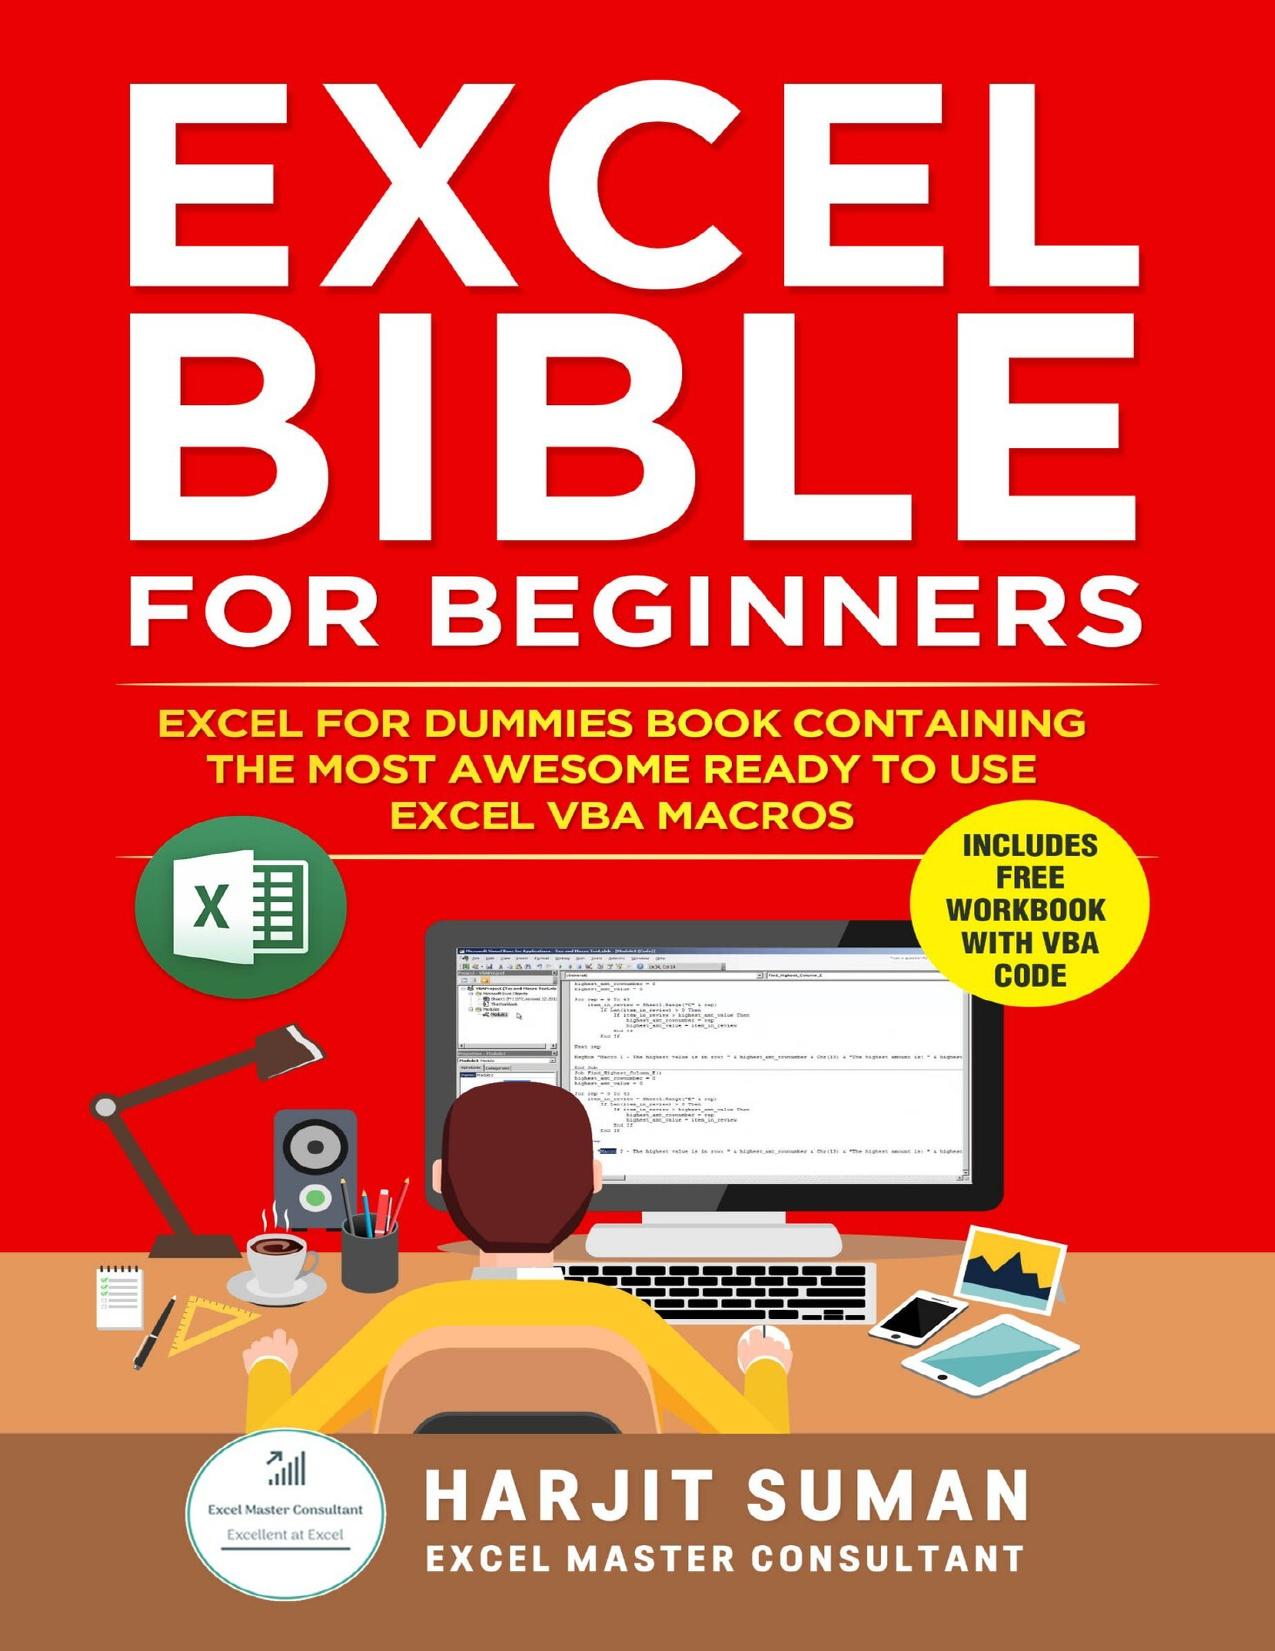 Excel Bible for Beginners: Excel for Dummies Book Containing the Most Awesome Ready to use Excel VBA Macros by Suman Harjit